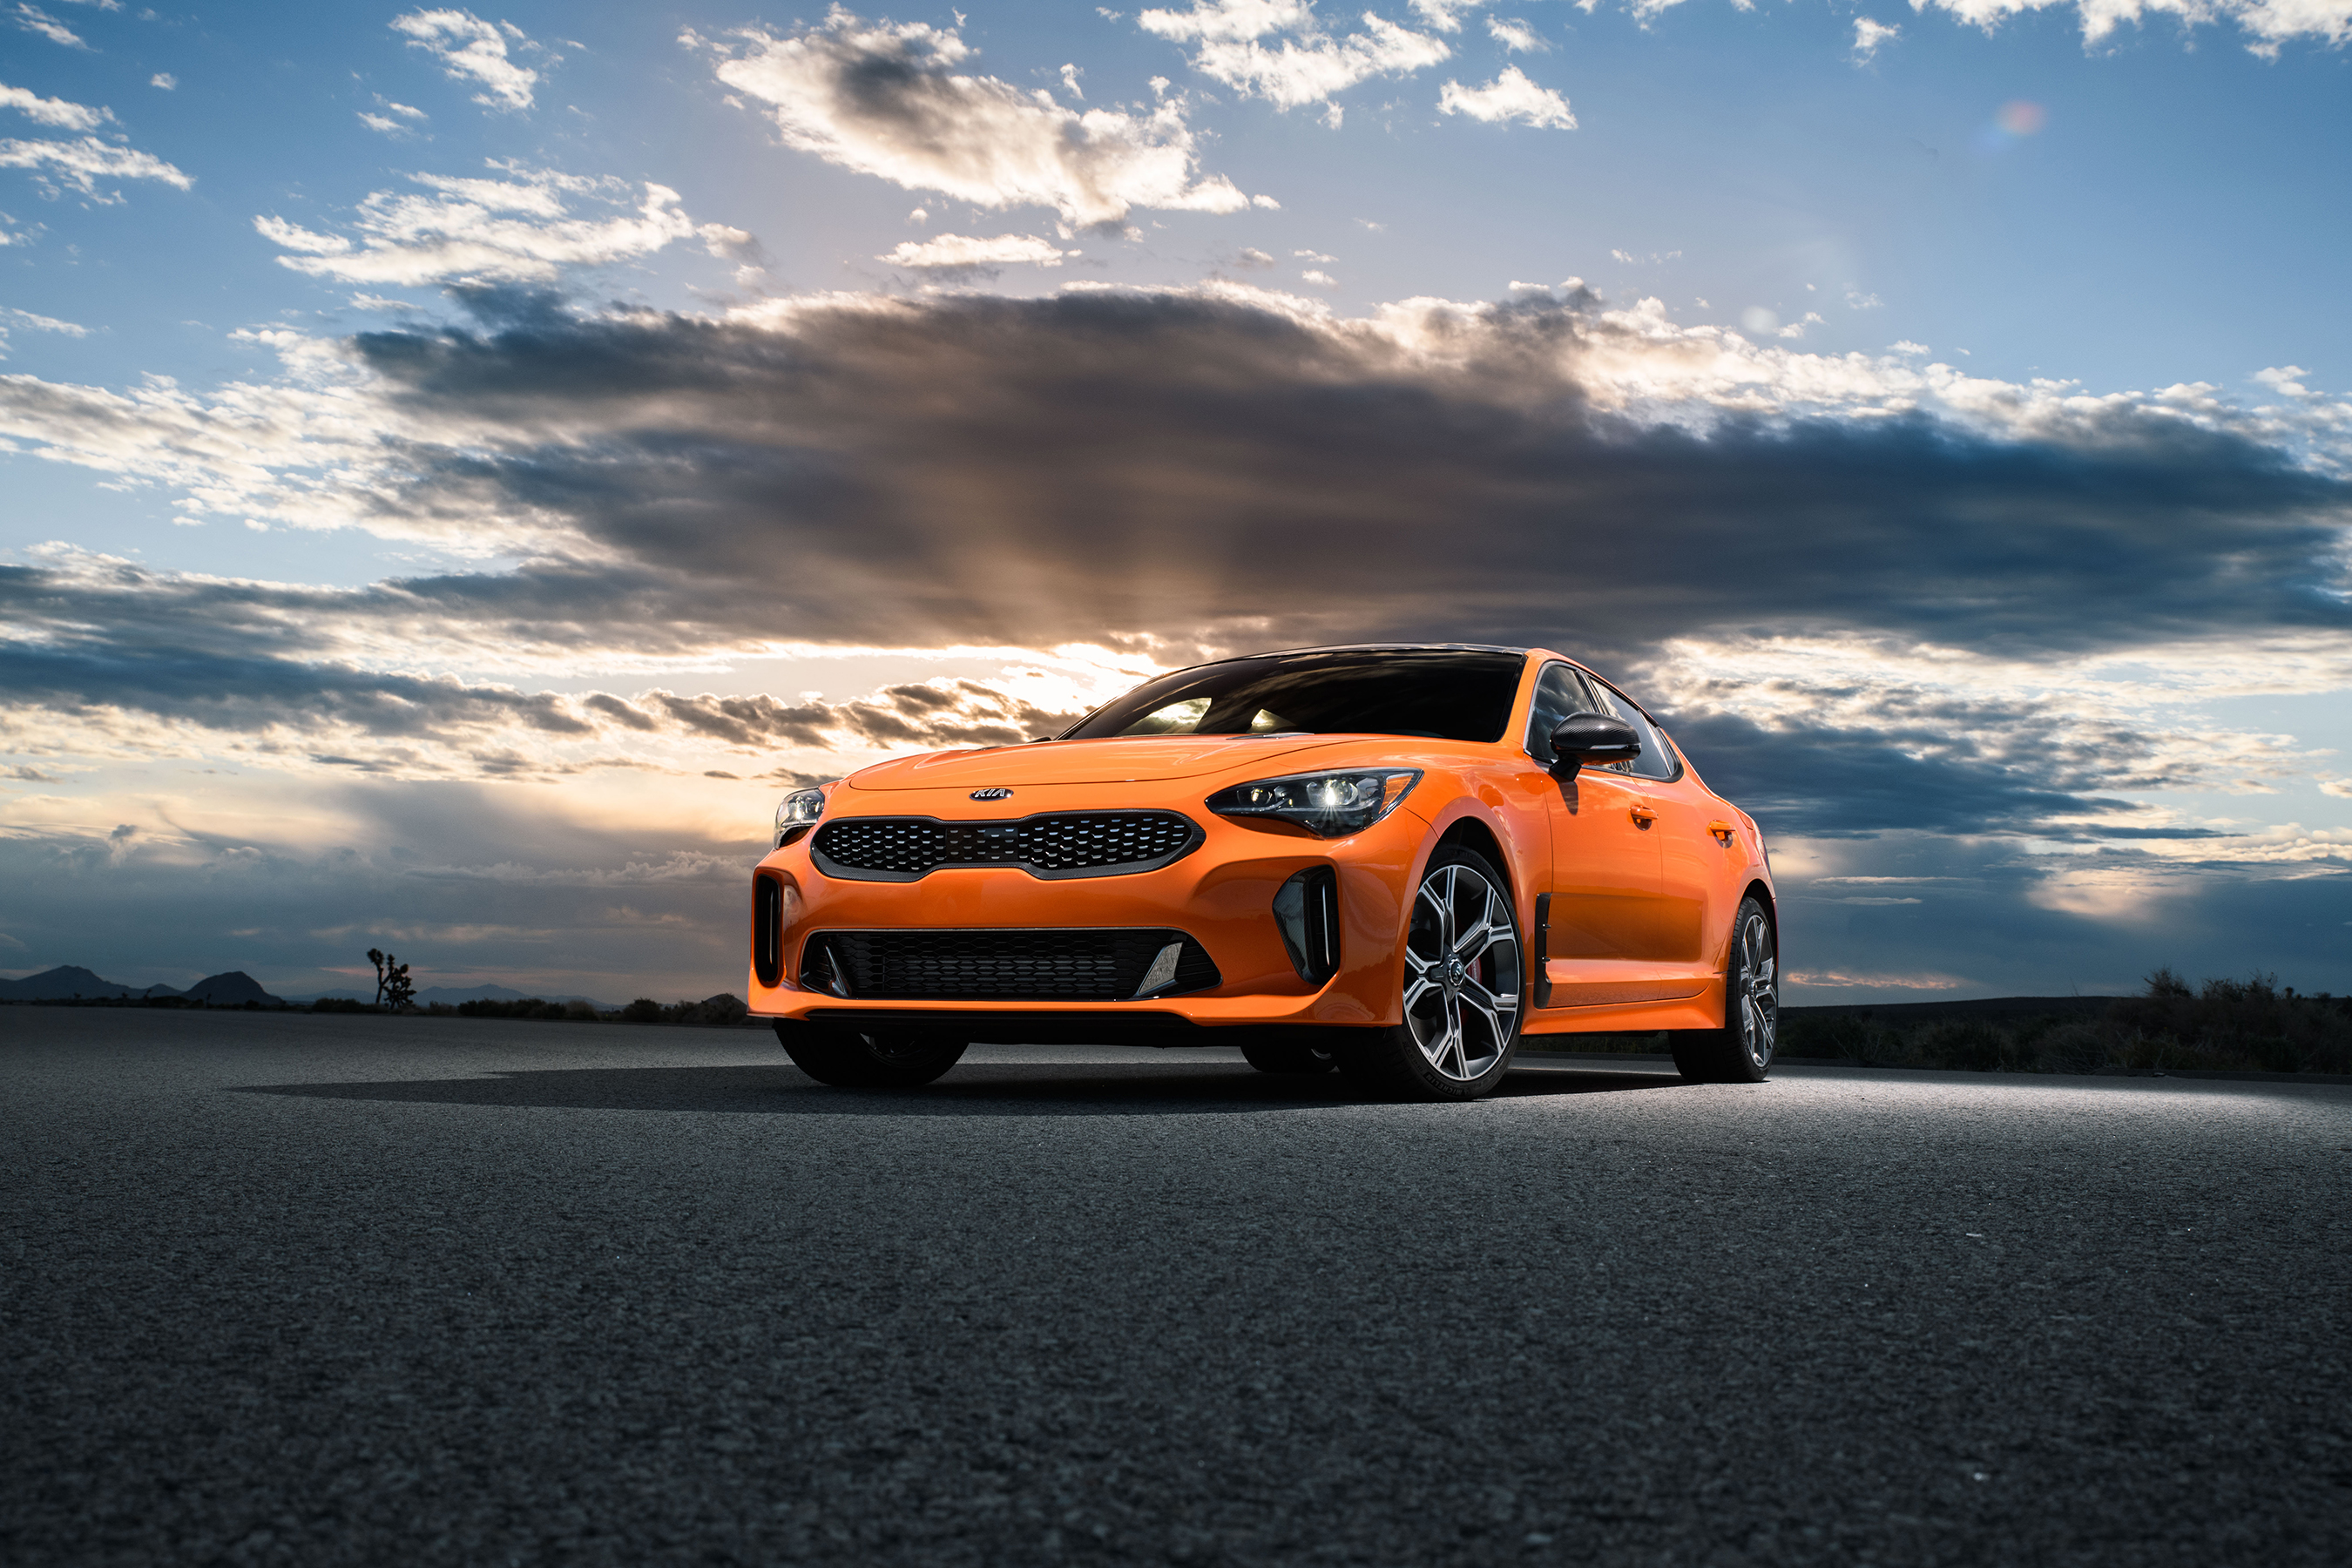 Limited-edition Kia Stinger GTS breaks cover at the New York International Auto Show. Less than 1,000 will be built.